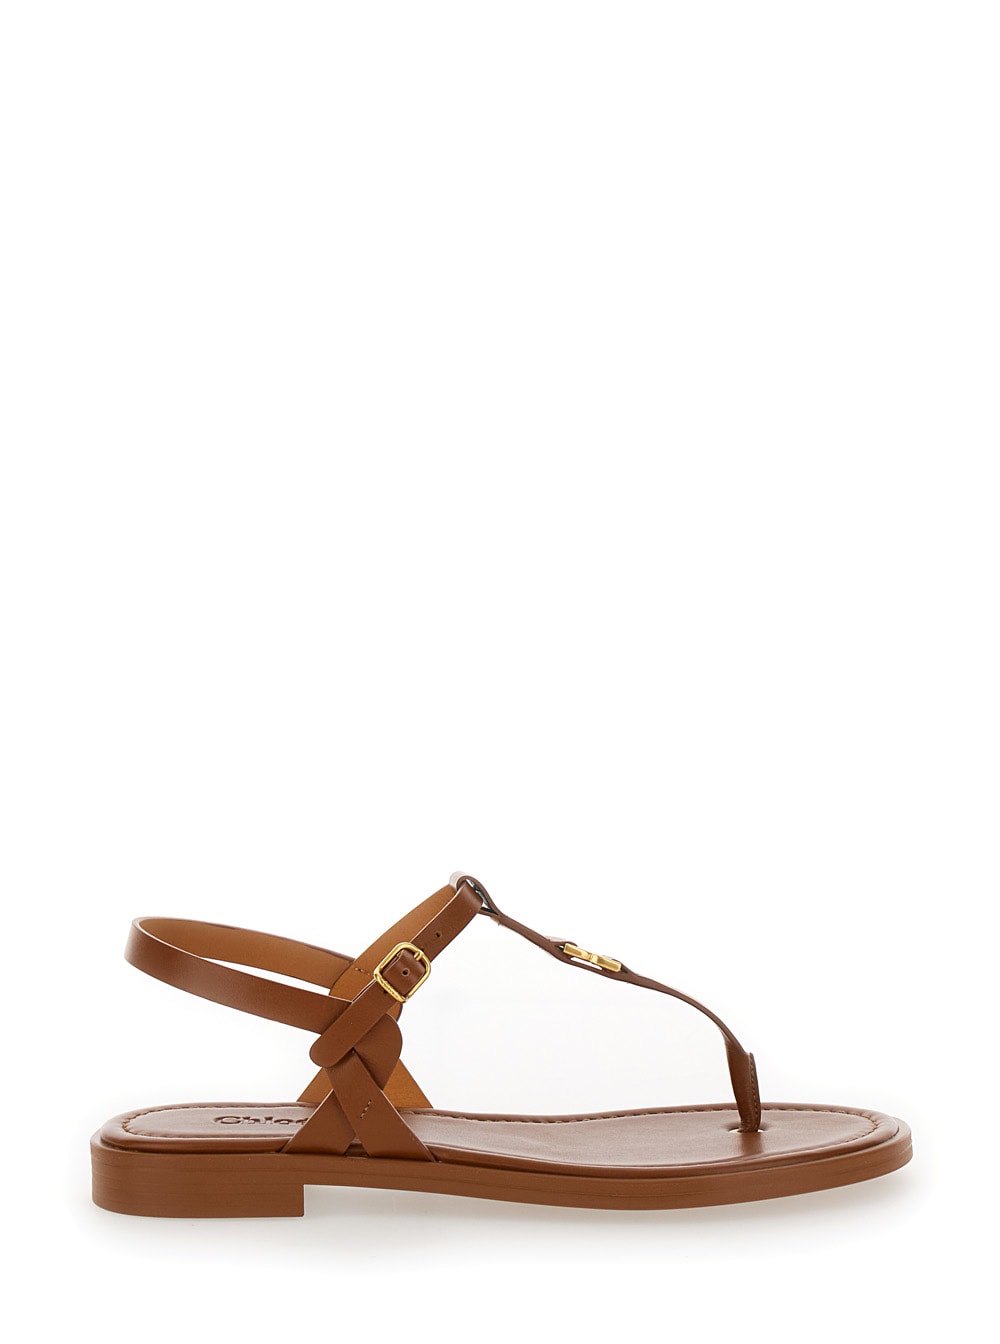 Chloé marcie Brown Flat Thongs Sandals In Leather Woman